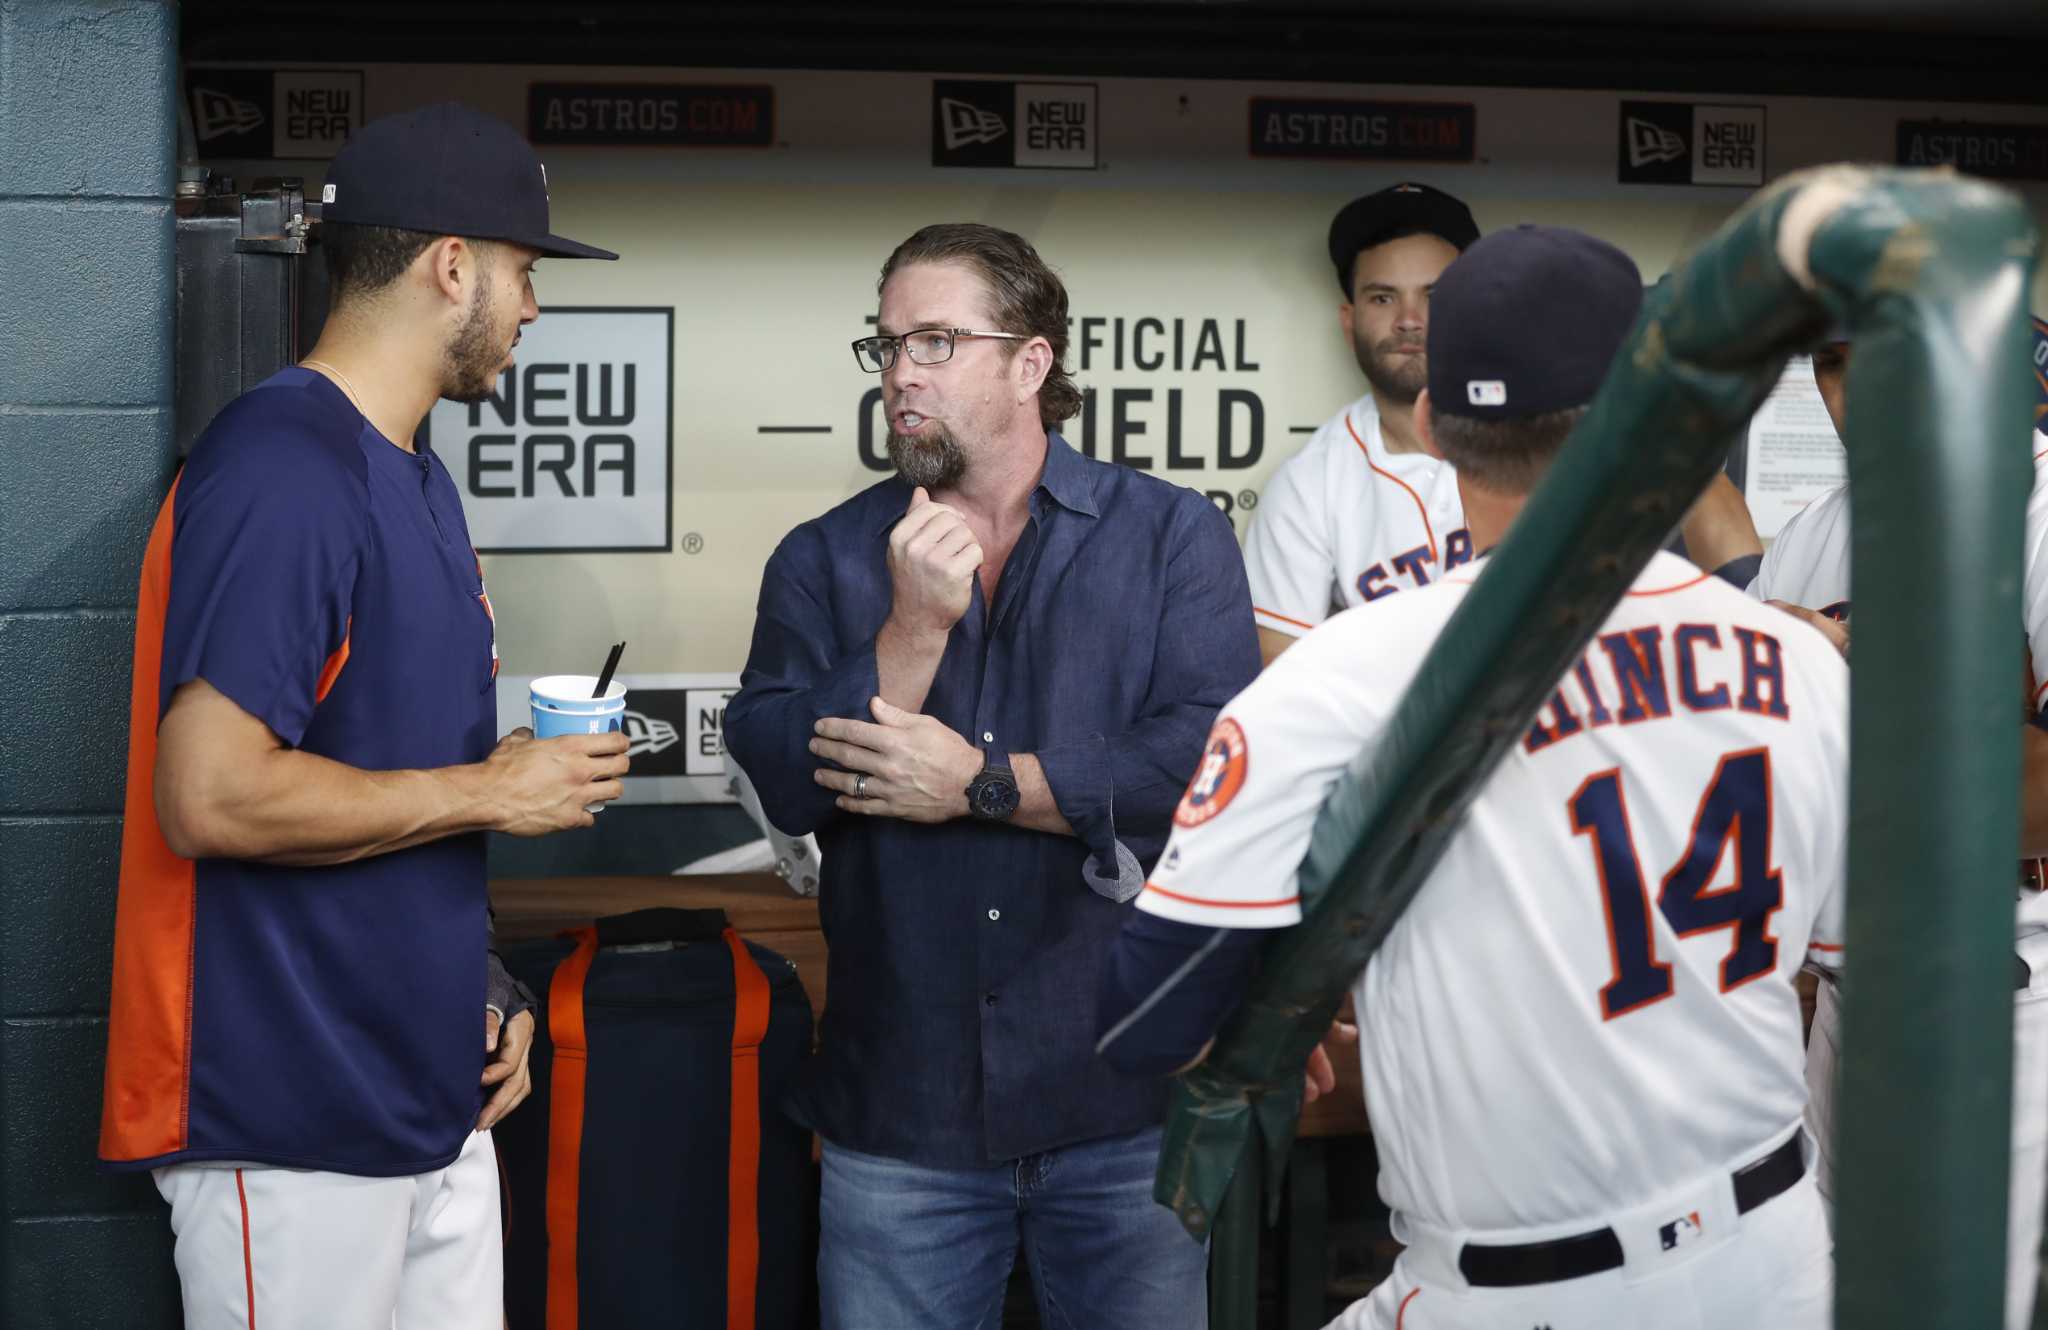 MLB: Former star Bagwell among guest instructors at Astros camp